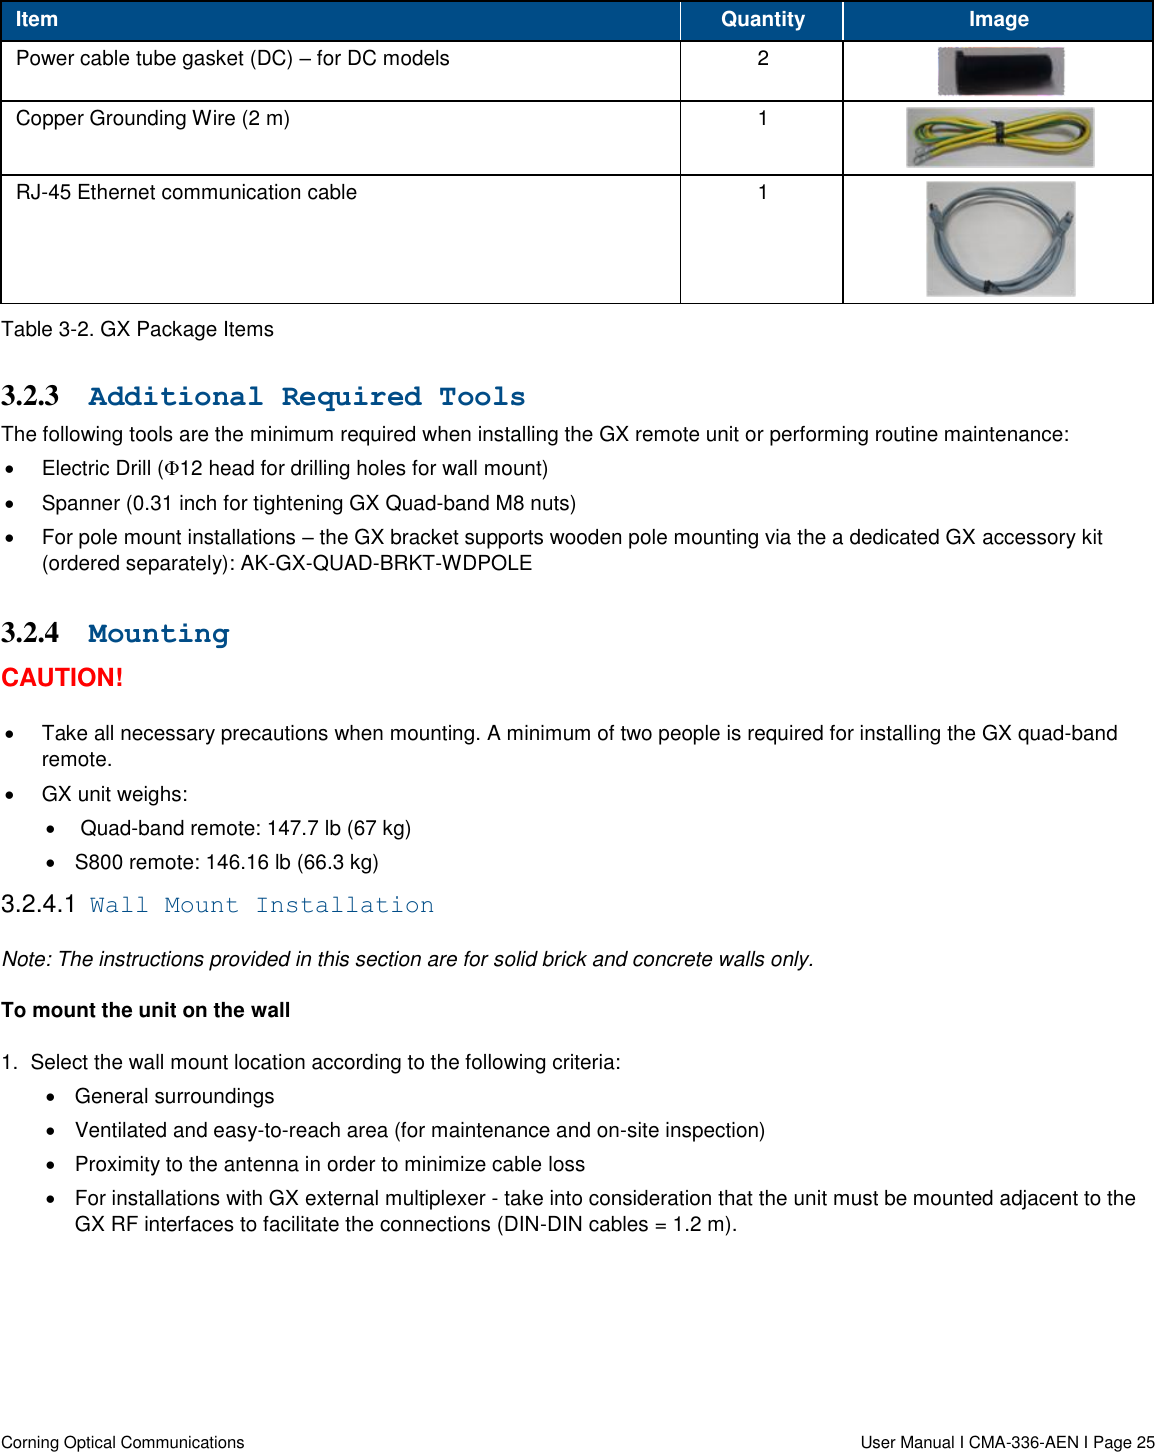   Corning Optical Communications                  User Manual I CMA-336-AEN I Page 25 Item Quantity Image Power cable tube gasket (DC) – for DC models 2  Copper Grounding Wire (2 m) 1  RJ-45 Ethernet communication cable 1  Table 3-2. GX Package Items 3.2.3 Additional Required Tools The following tools are the minimum required when installing the GX remote unit or performing routine maintenance:    Electric Drill (Φ12 head for drilling holes for wall mount)   Spanner (0.31 inch for tightening GX Quad-band M8 nuts)   For pole mount installations – the GX bracket supports wooden pole mounting via the a dedicated GX accessory kit (ordered separately): AK-GX-QUAD-BRKT-WDPOLE 3.2.4 Mounting CAUTION!   Take all necessary precautions when mounting. A minimum of two people is required for installing the GX quad-band remote.  GX unit weighs:    Quad-band remote: 147.7 lb (67 kg)   S800 remote: 146.16 lb (66.3 kg) 3.2.4.1  Wall Mount Installation Note: The instructions provided in this section are for solid brick and concrete walls only.  To mount the unit on the wall 1.  Select the wall mount location according to the following criteria:   General surroundings   Ventilated and easy-to-reach area (for maintenance and on-site inspection)   Proximity to the antenna in order to minimize cable loss    For installations with GX external multiplexer - take into consideration that the unit must be mounted adjacent to the GX RF interfaces to facilitate the connections (DIN-DIN cables = 1.2 m).    